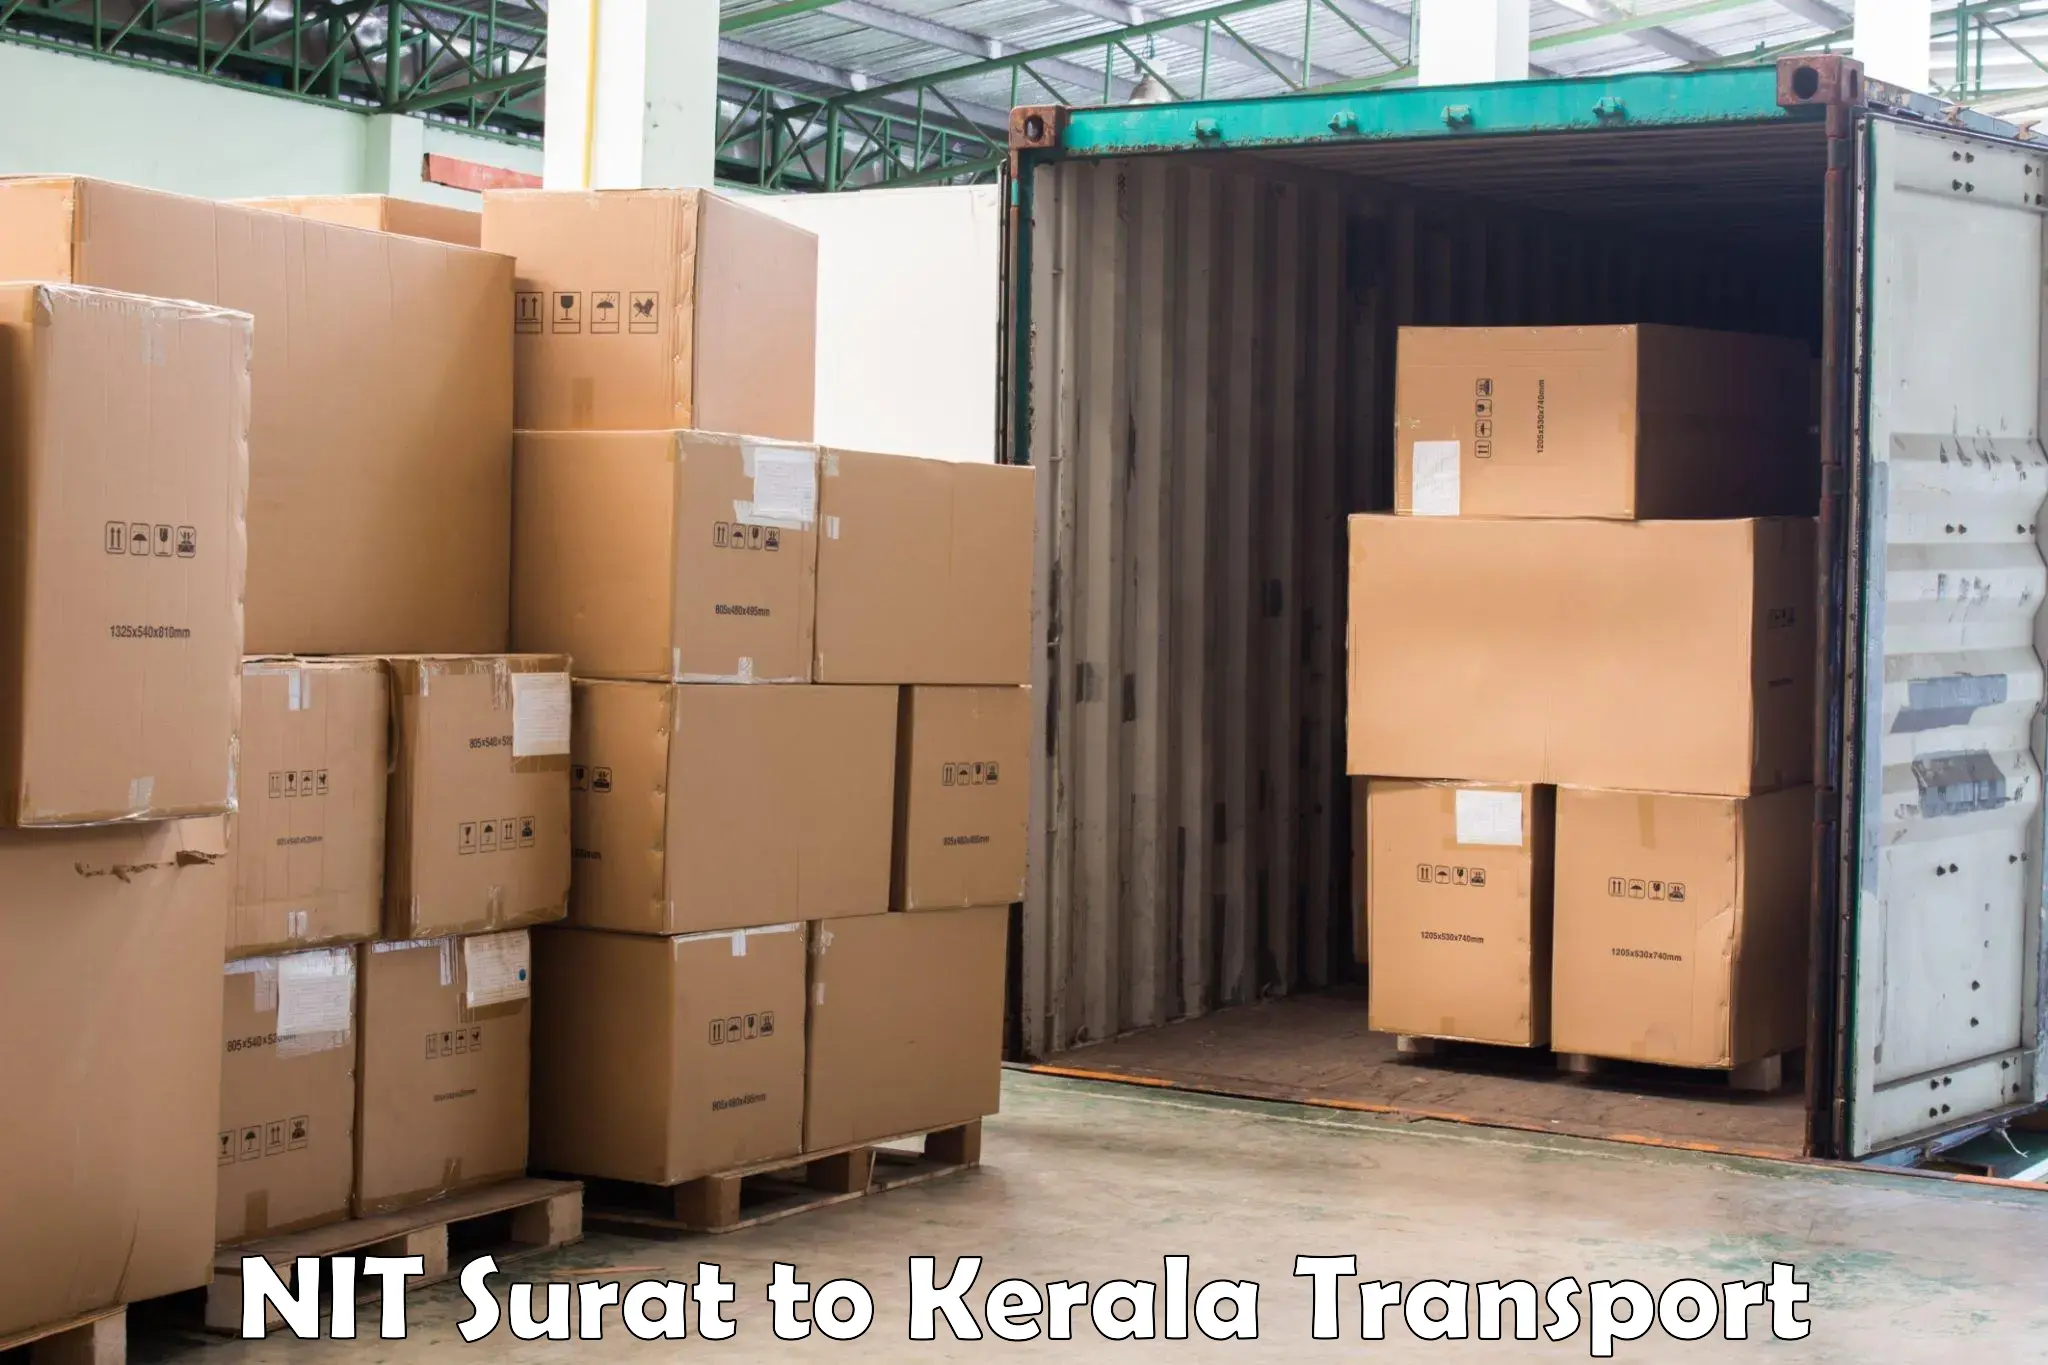 Lorry transport service NIT Surat to Cochin University of Science and Technology